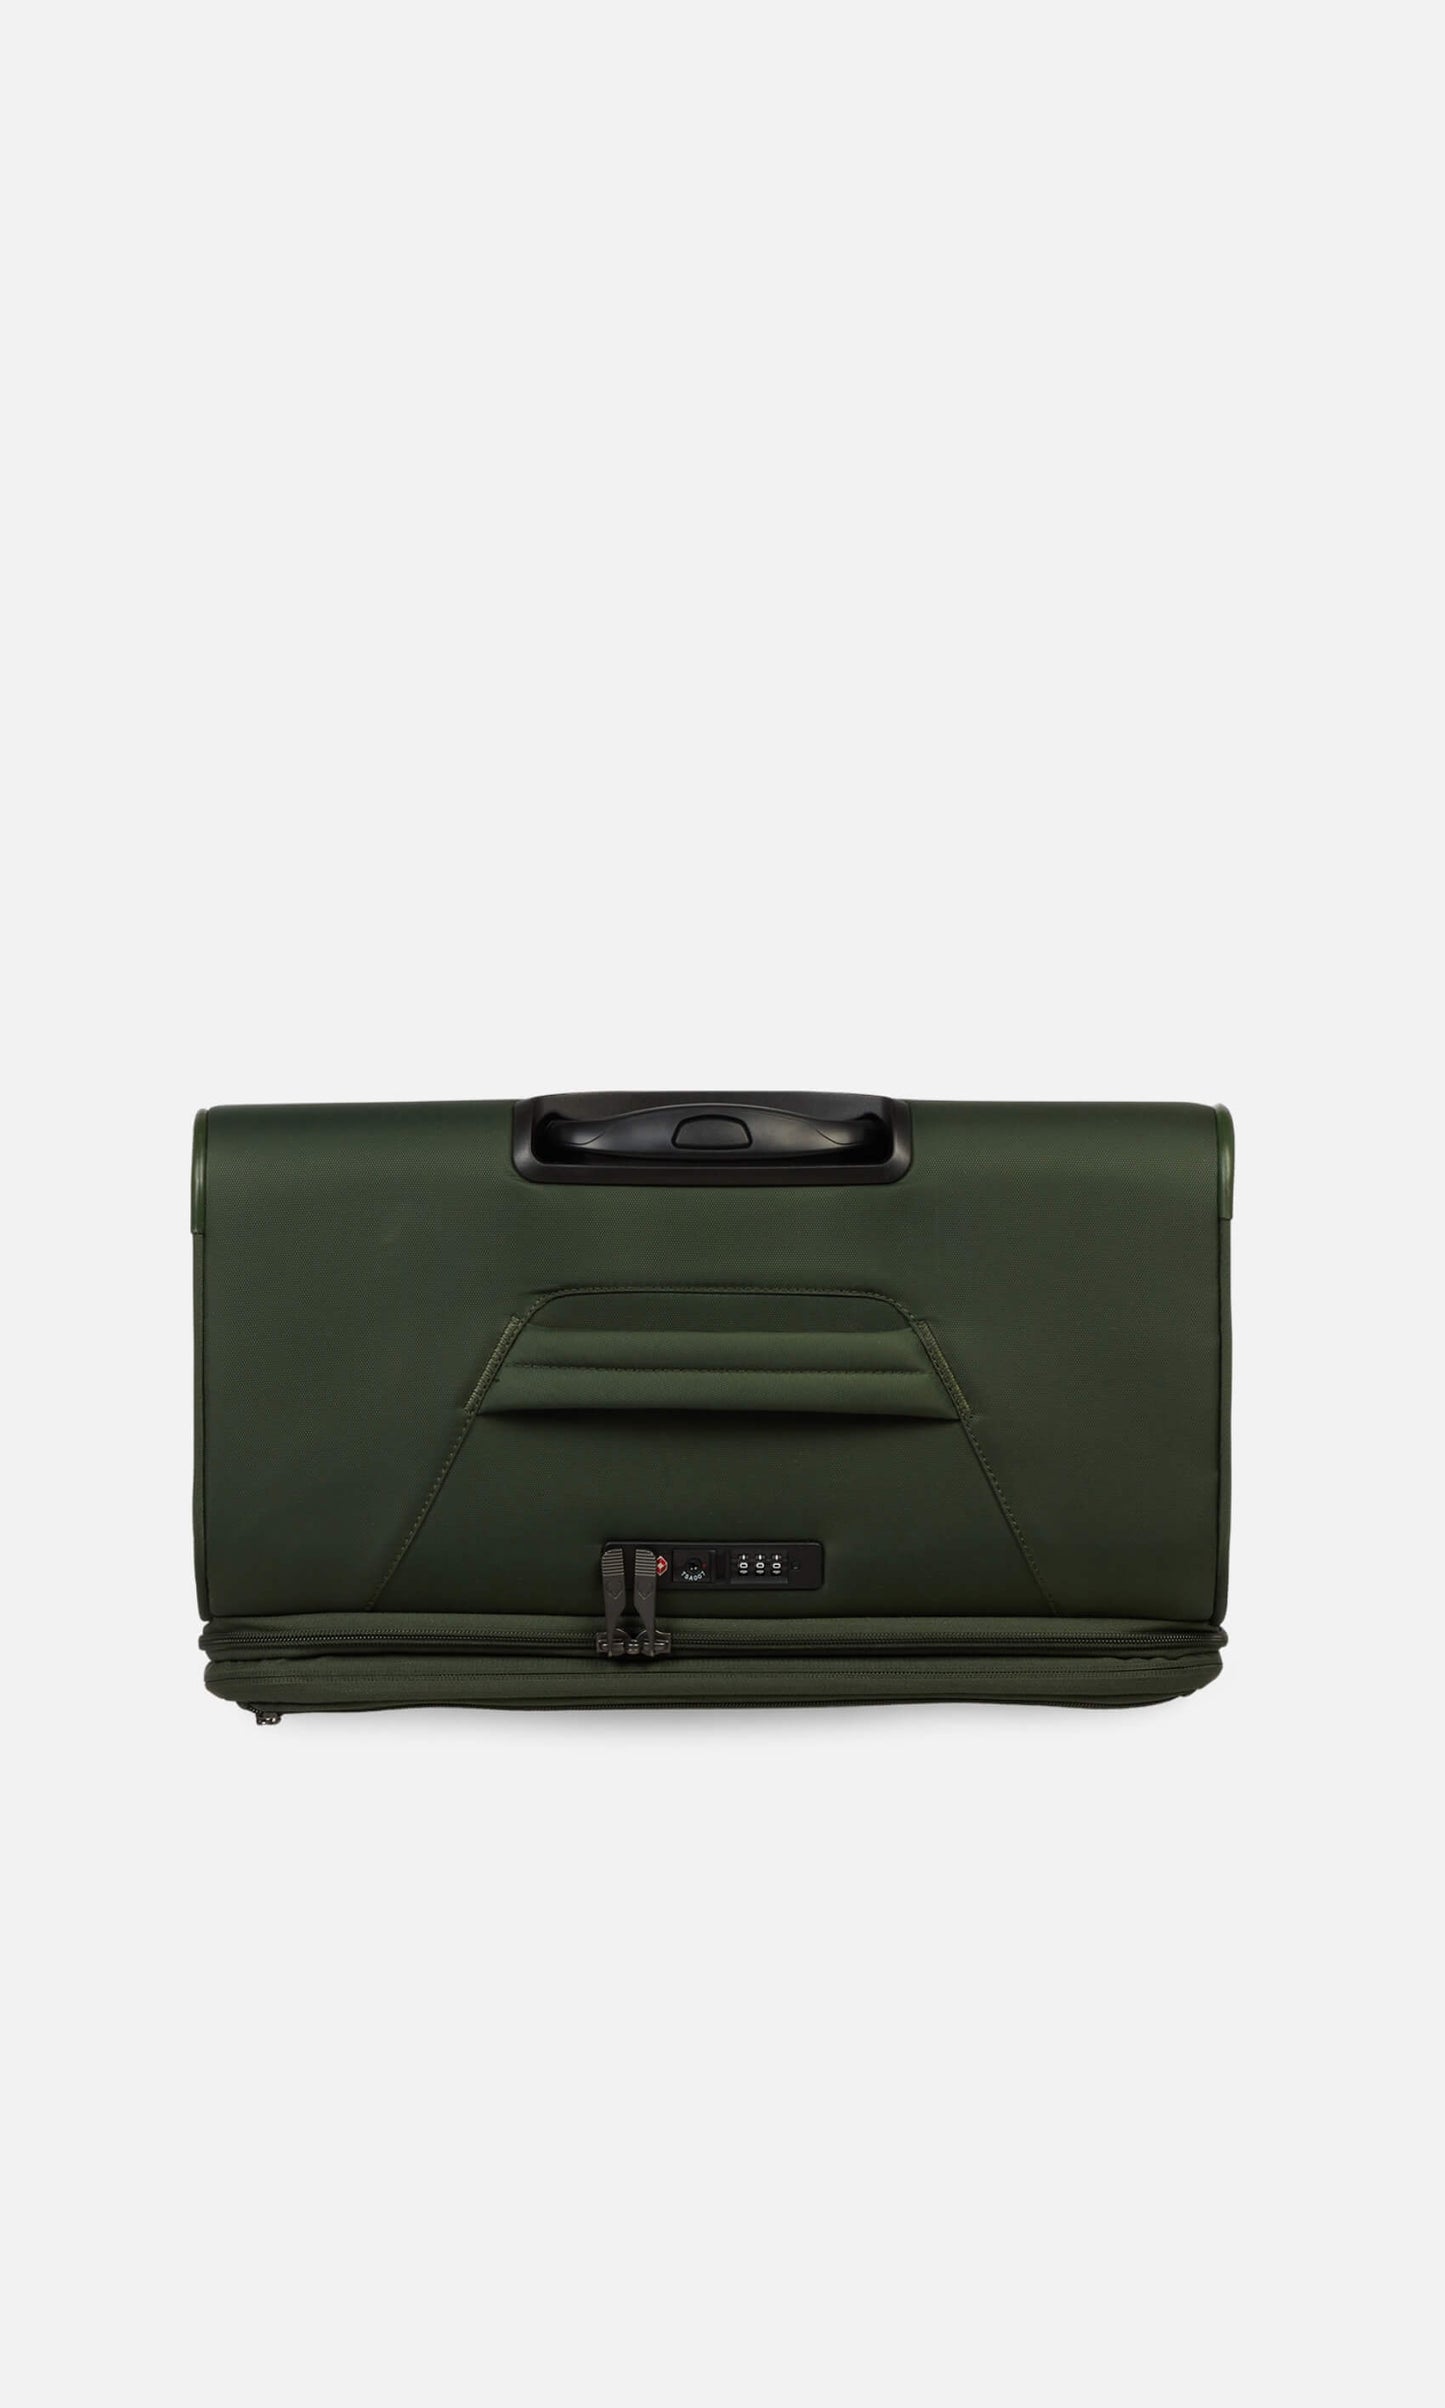 Antler Luggage -  Brixham set in canopy green - Soft Suitcases Prestwick Set of 3 Suitcases Green | Soft Suitcases | Antler 